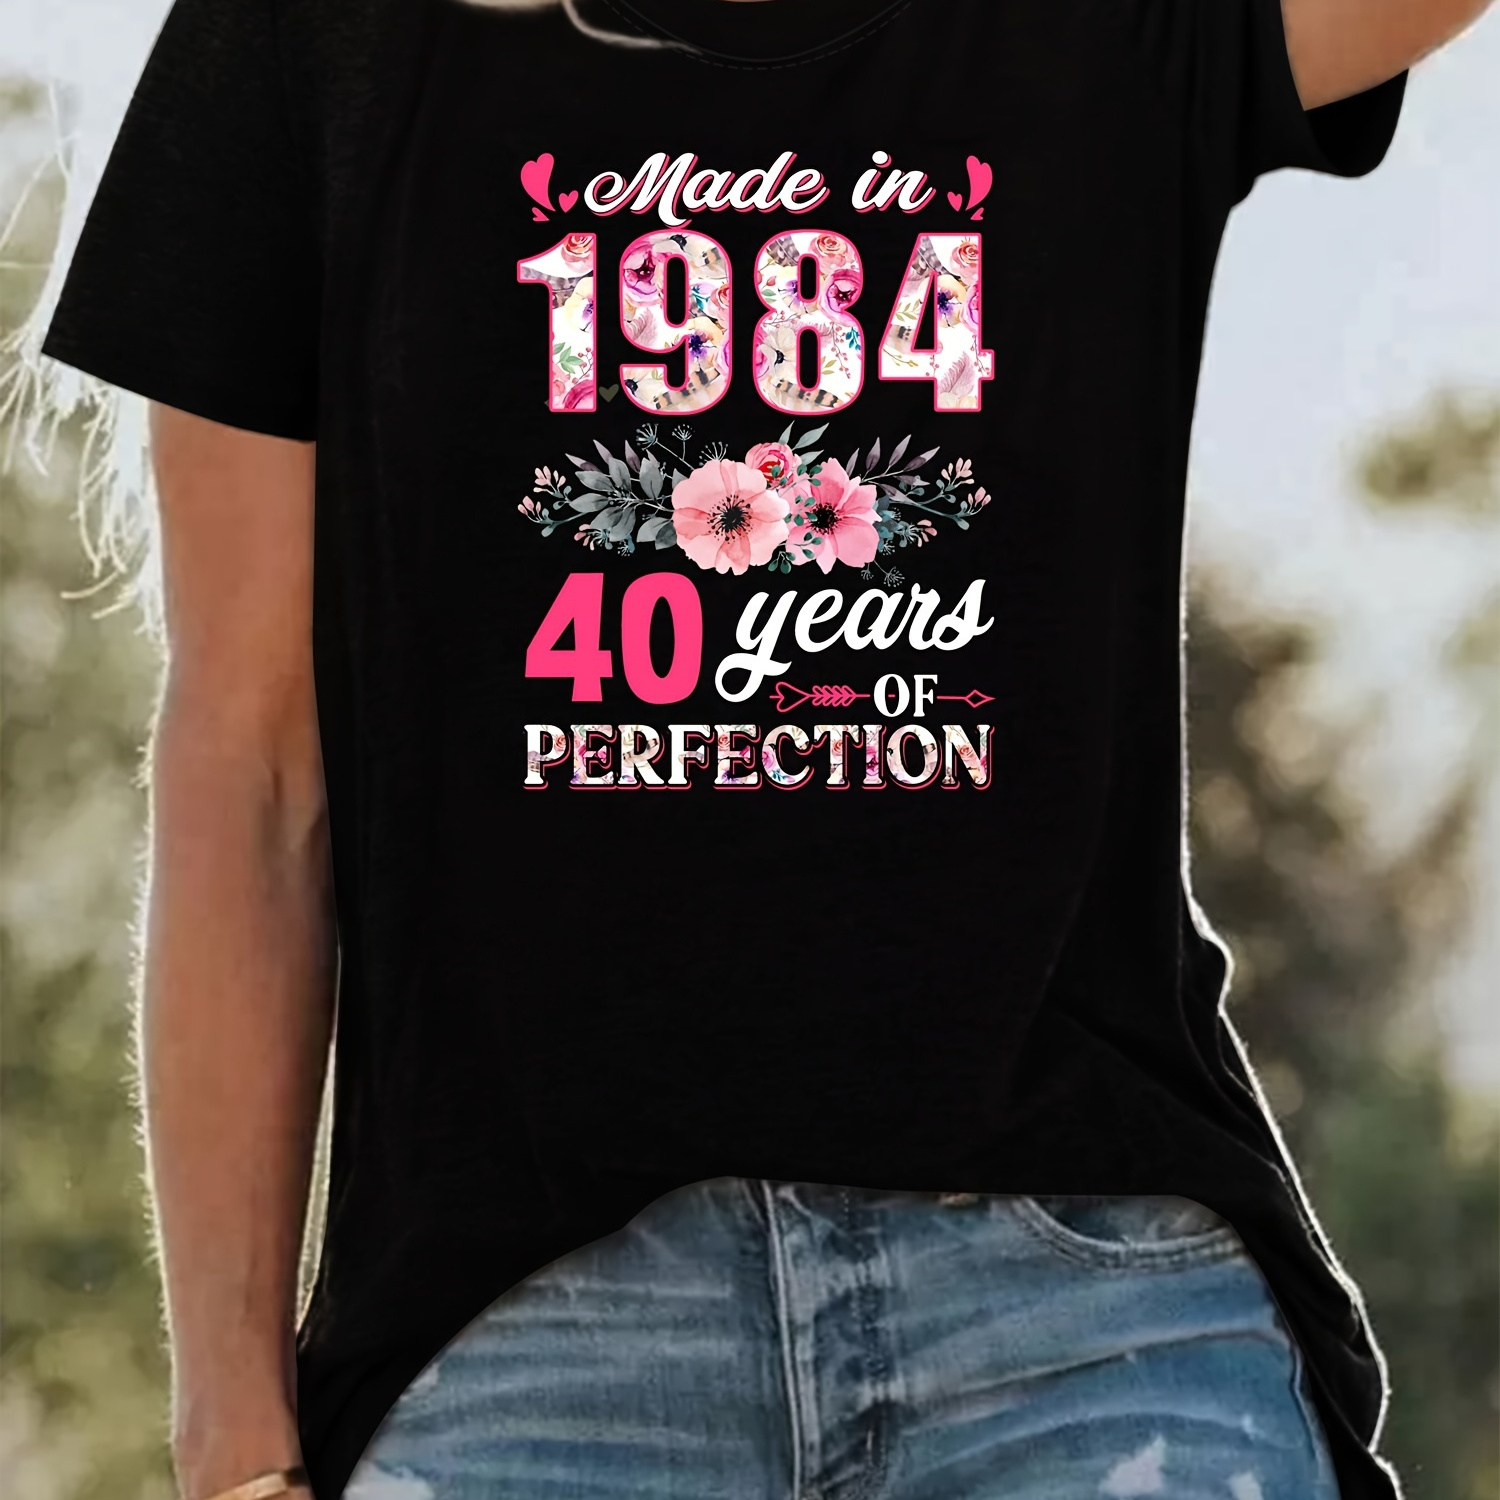 

1984 Letter & Floral Print Crew Neck T-shirt, Casual Short Sleeve Top For Summer & Spring, Women's Clothing